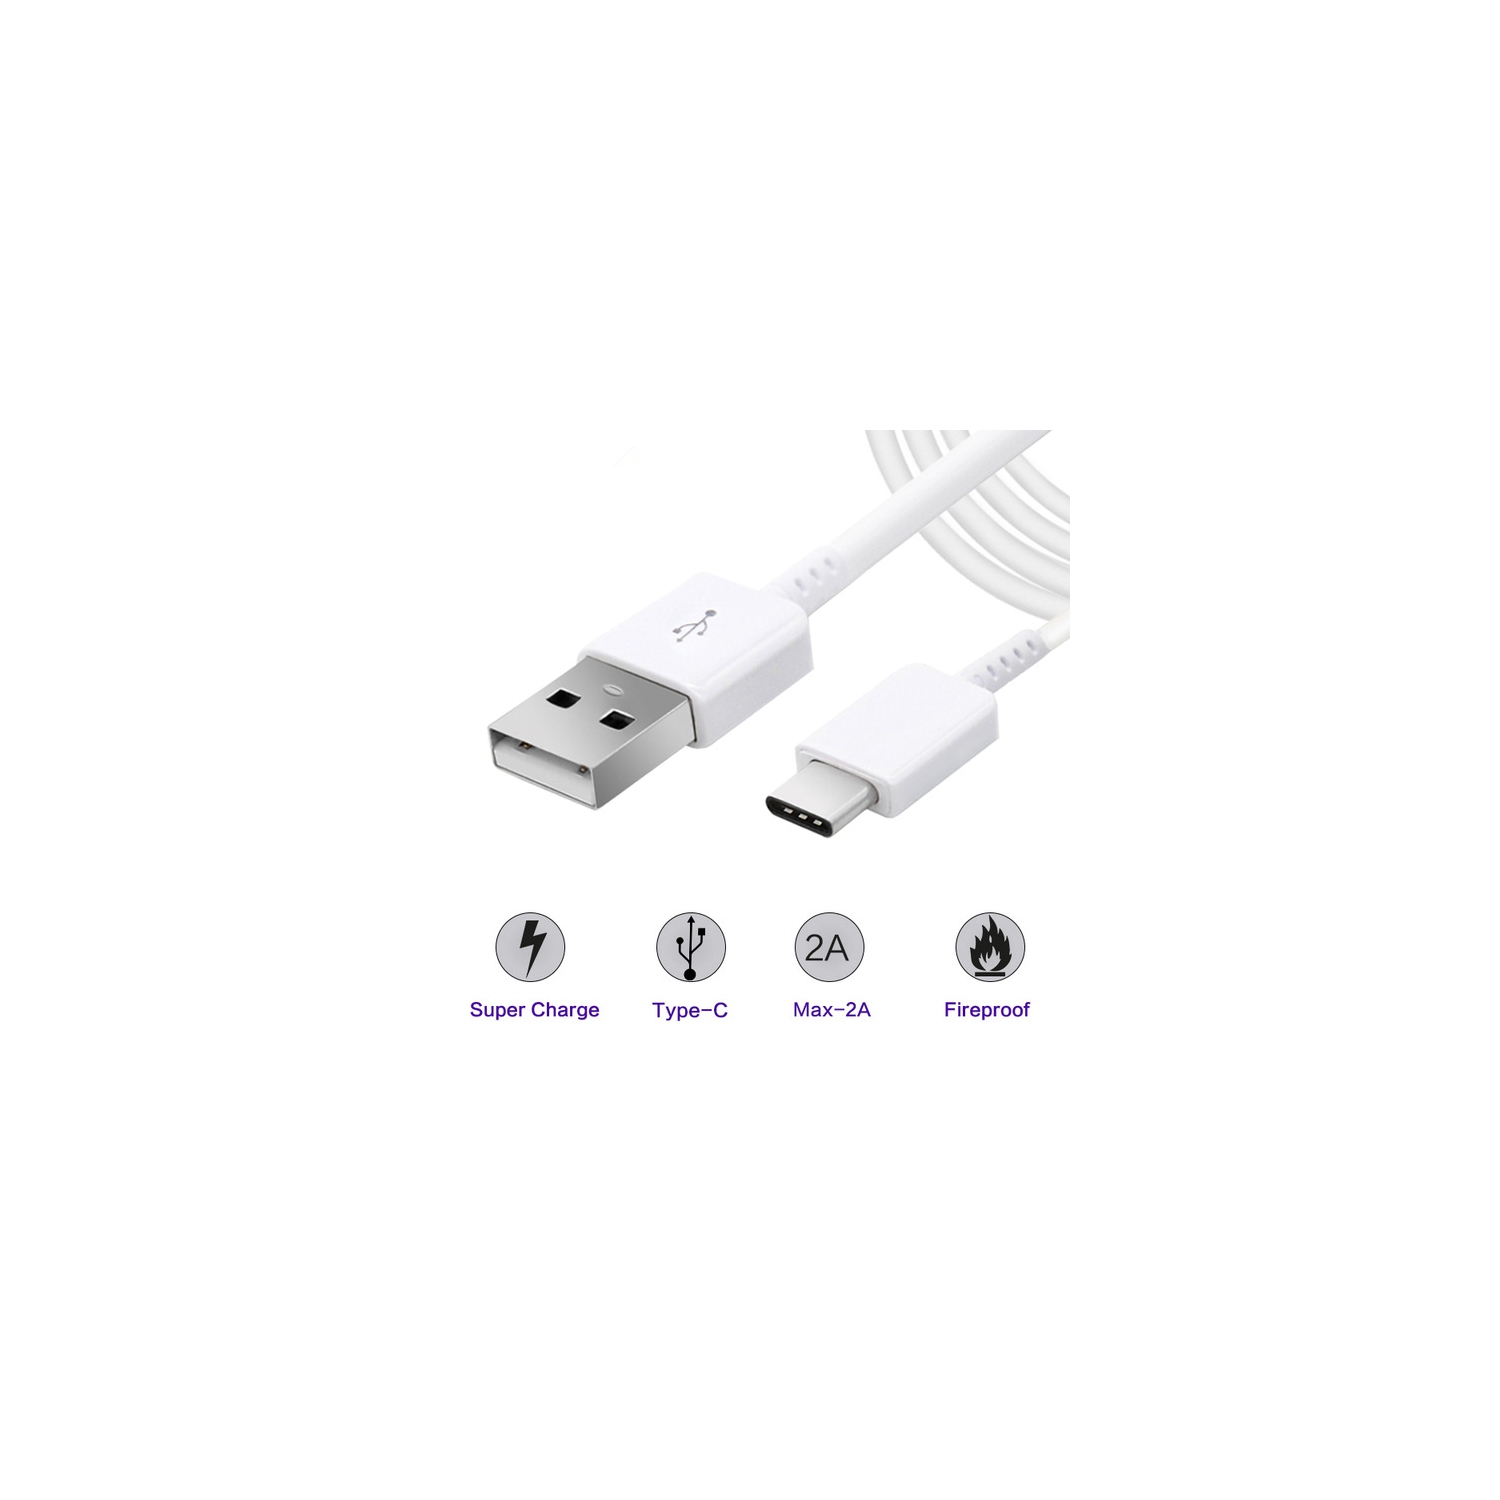 USB to Type C Fast Charging Charger Data & Sync Cable for Samsung Galaxy S8 S9 S10 S20 Note 8 9 10 20, White